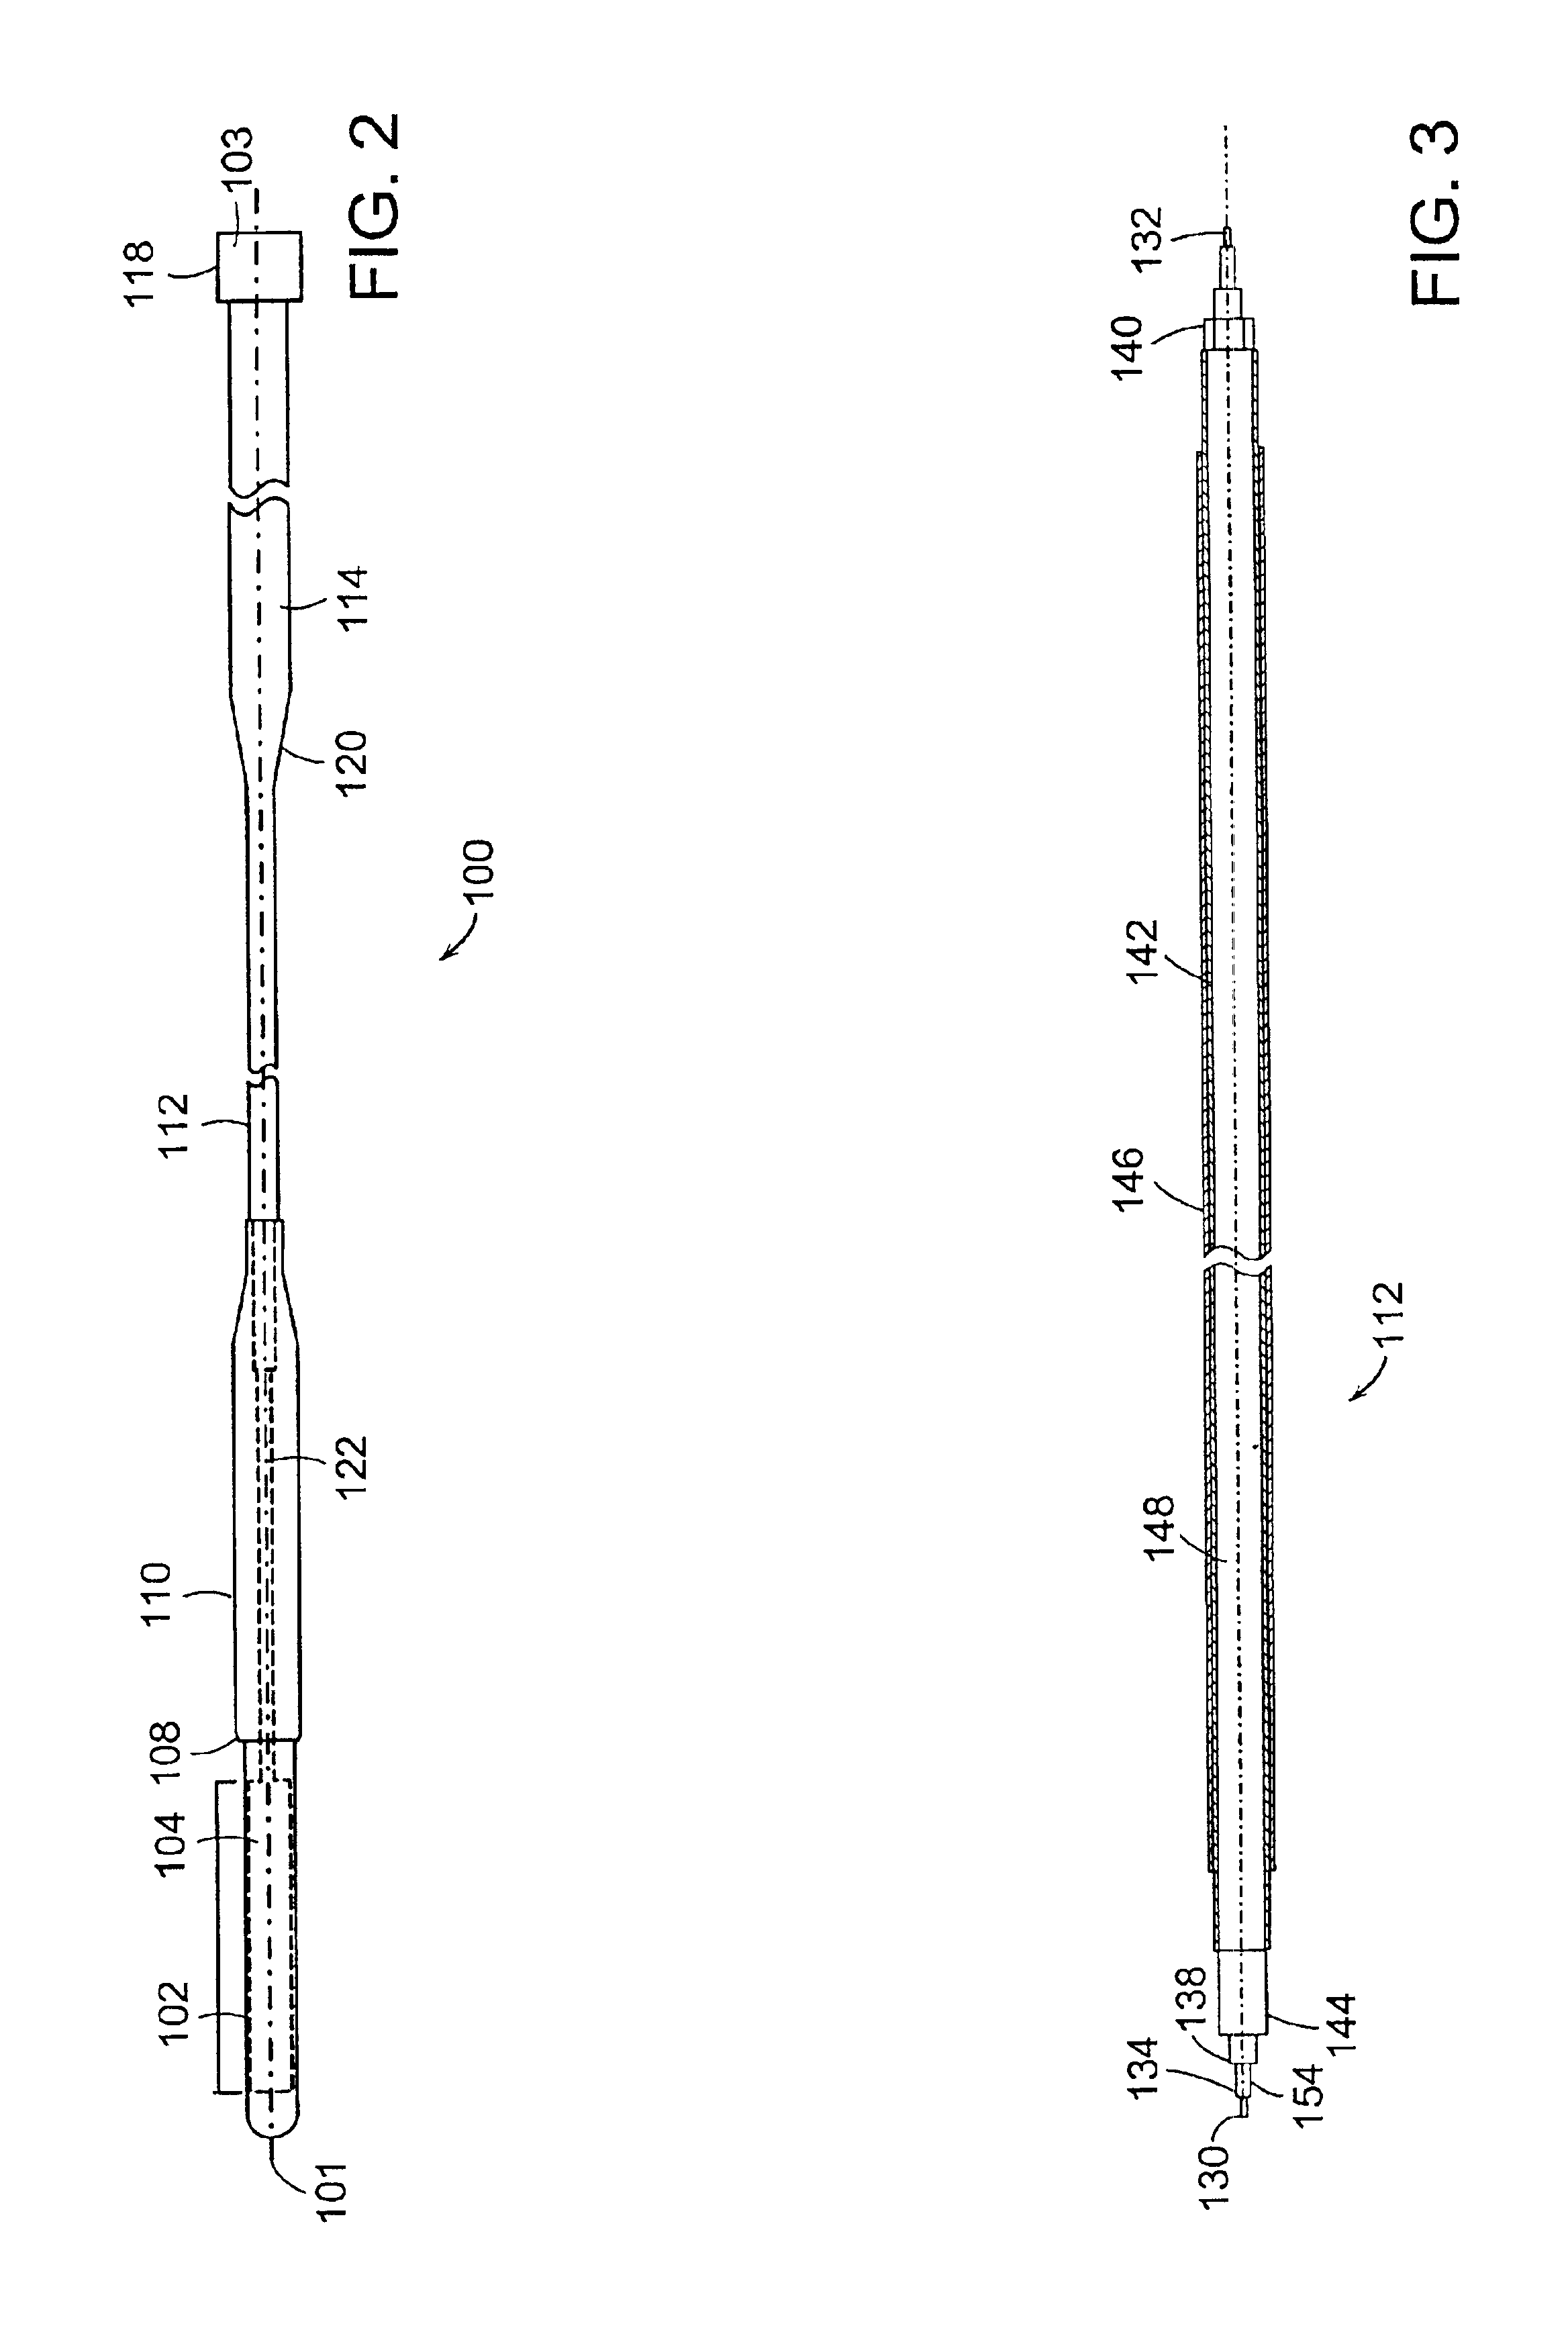 Systems and methods for evaluating the urethra and the periurethral tissues